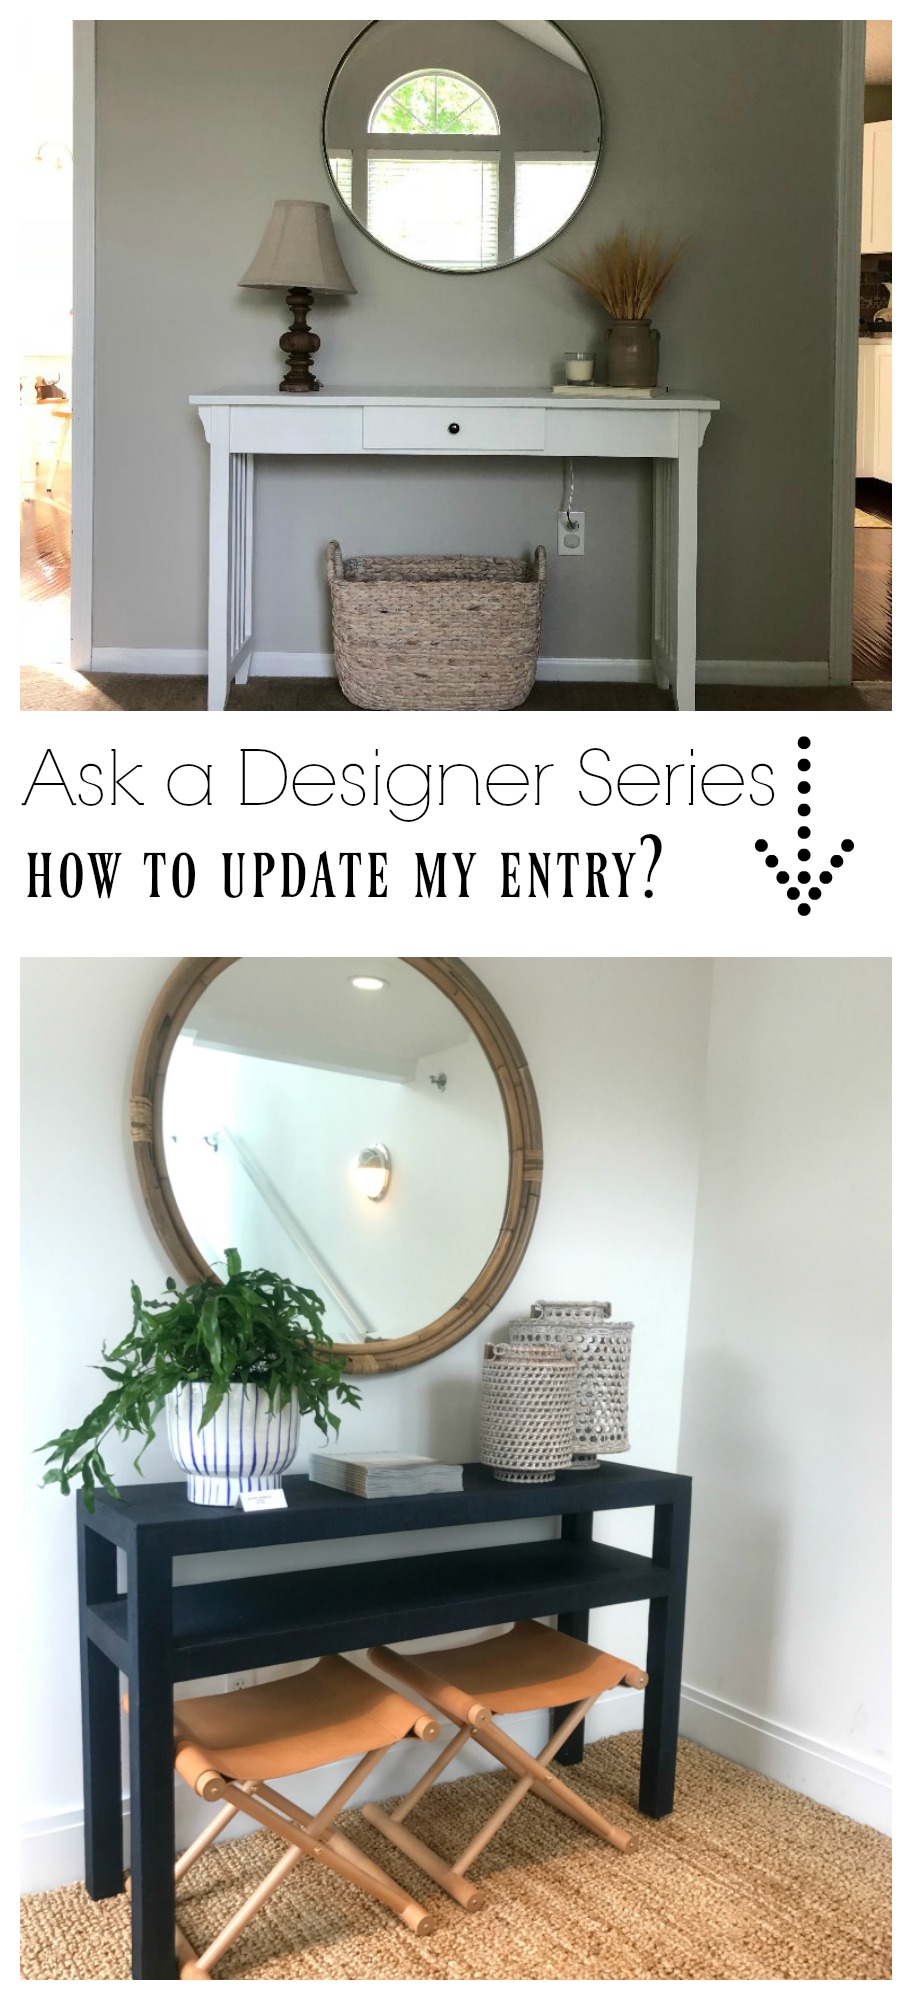 Ask a Designer Series- How to update my Entry?